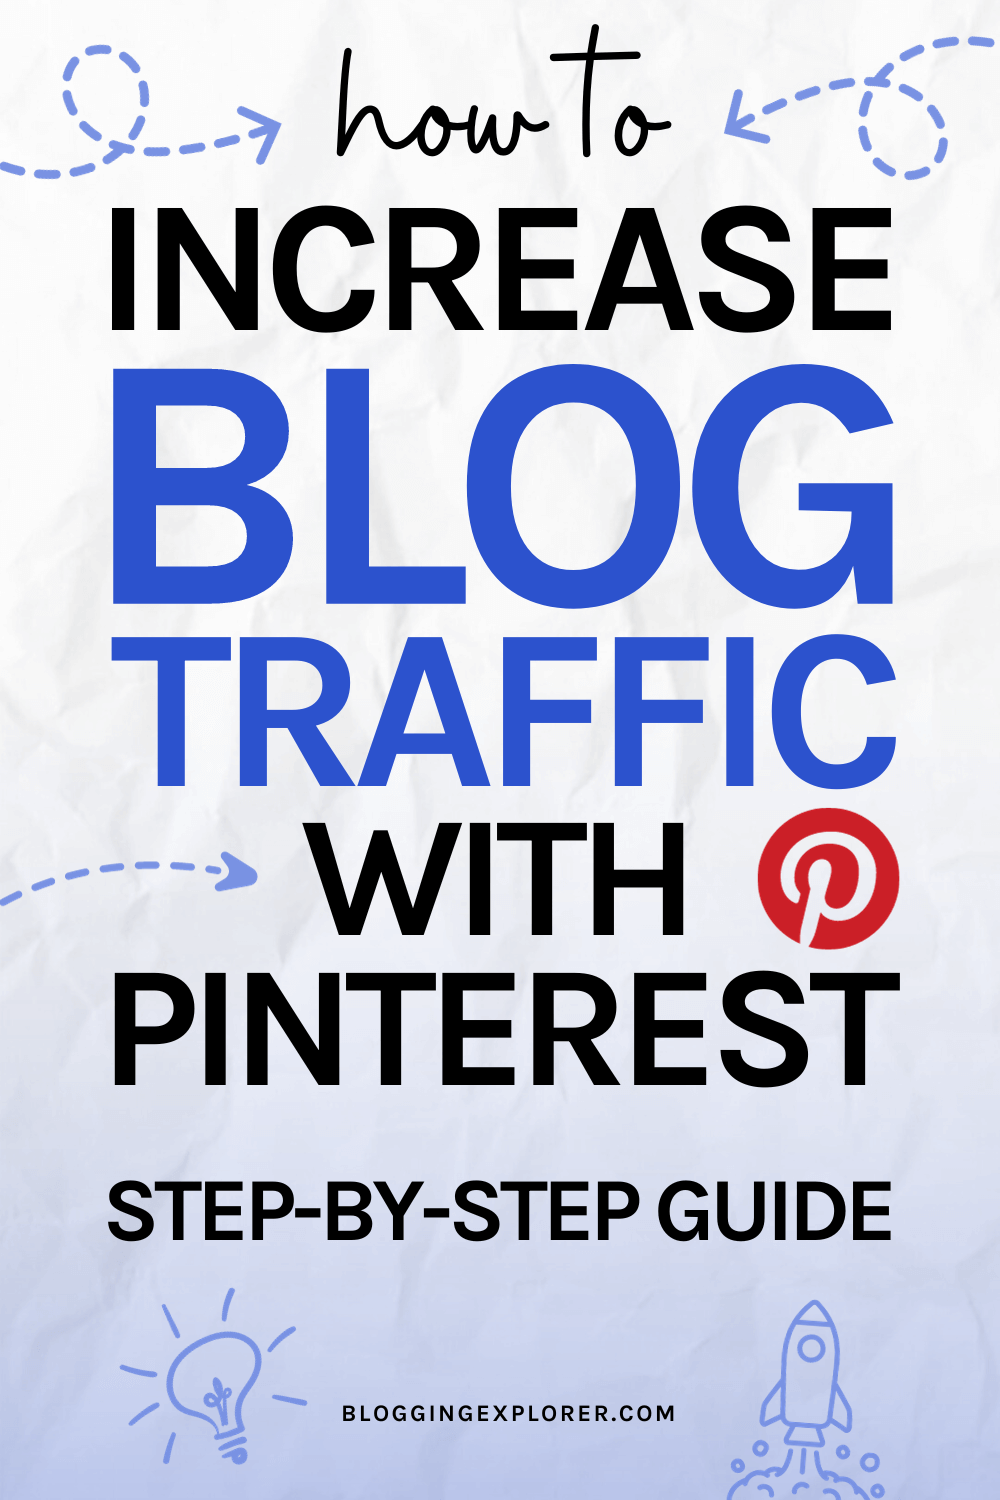 How to increase blo traffic with Pinterest - Step-by-step Pinterest marketing guide for bloggers